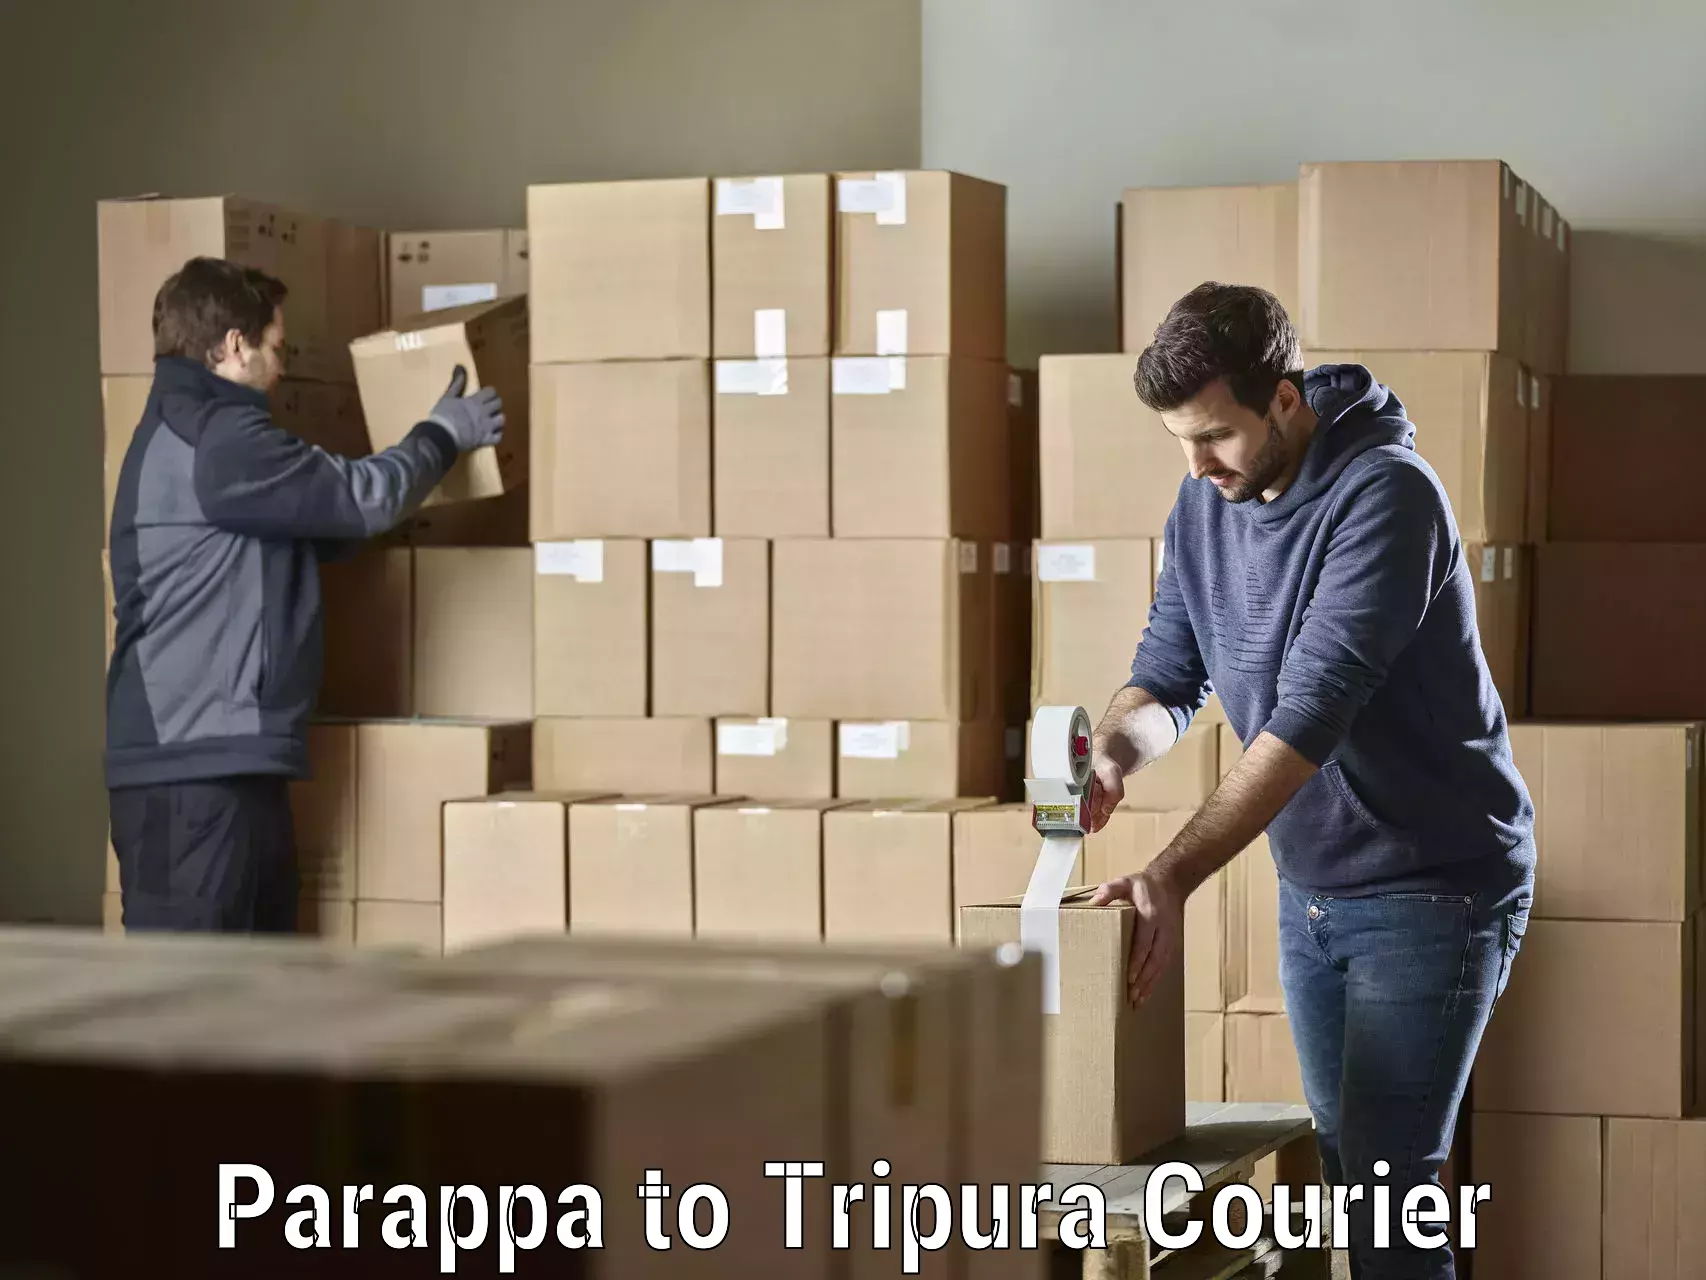 Professional courier services Parappa to Udaipur Tripura